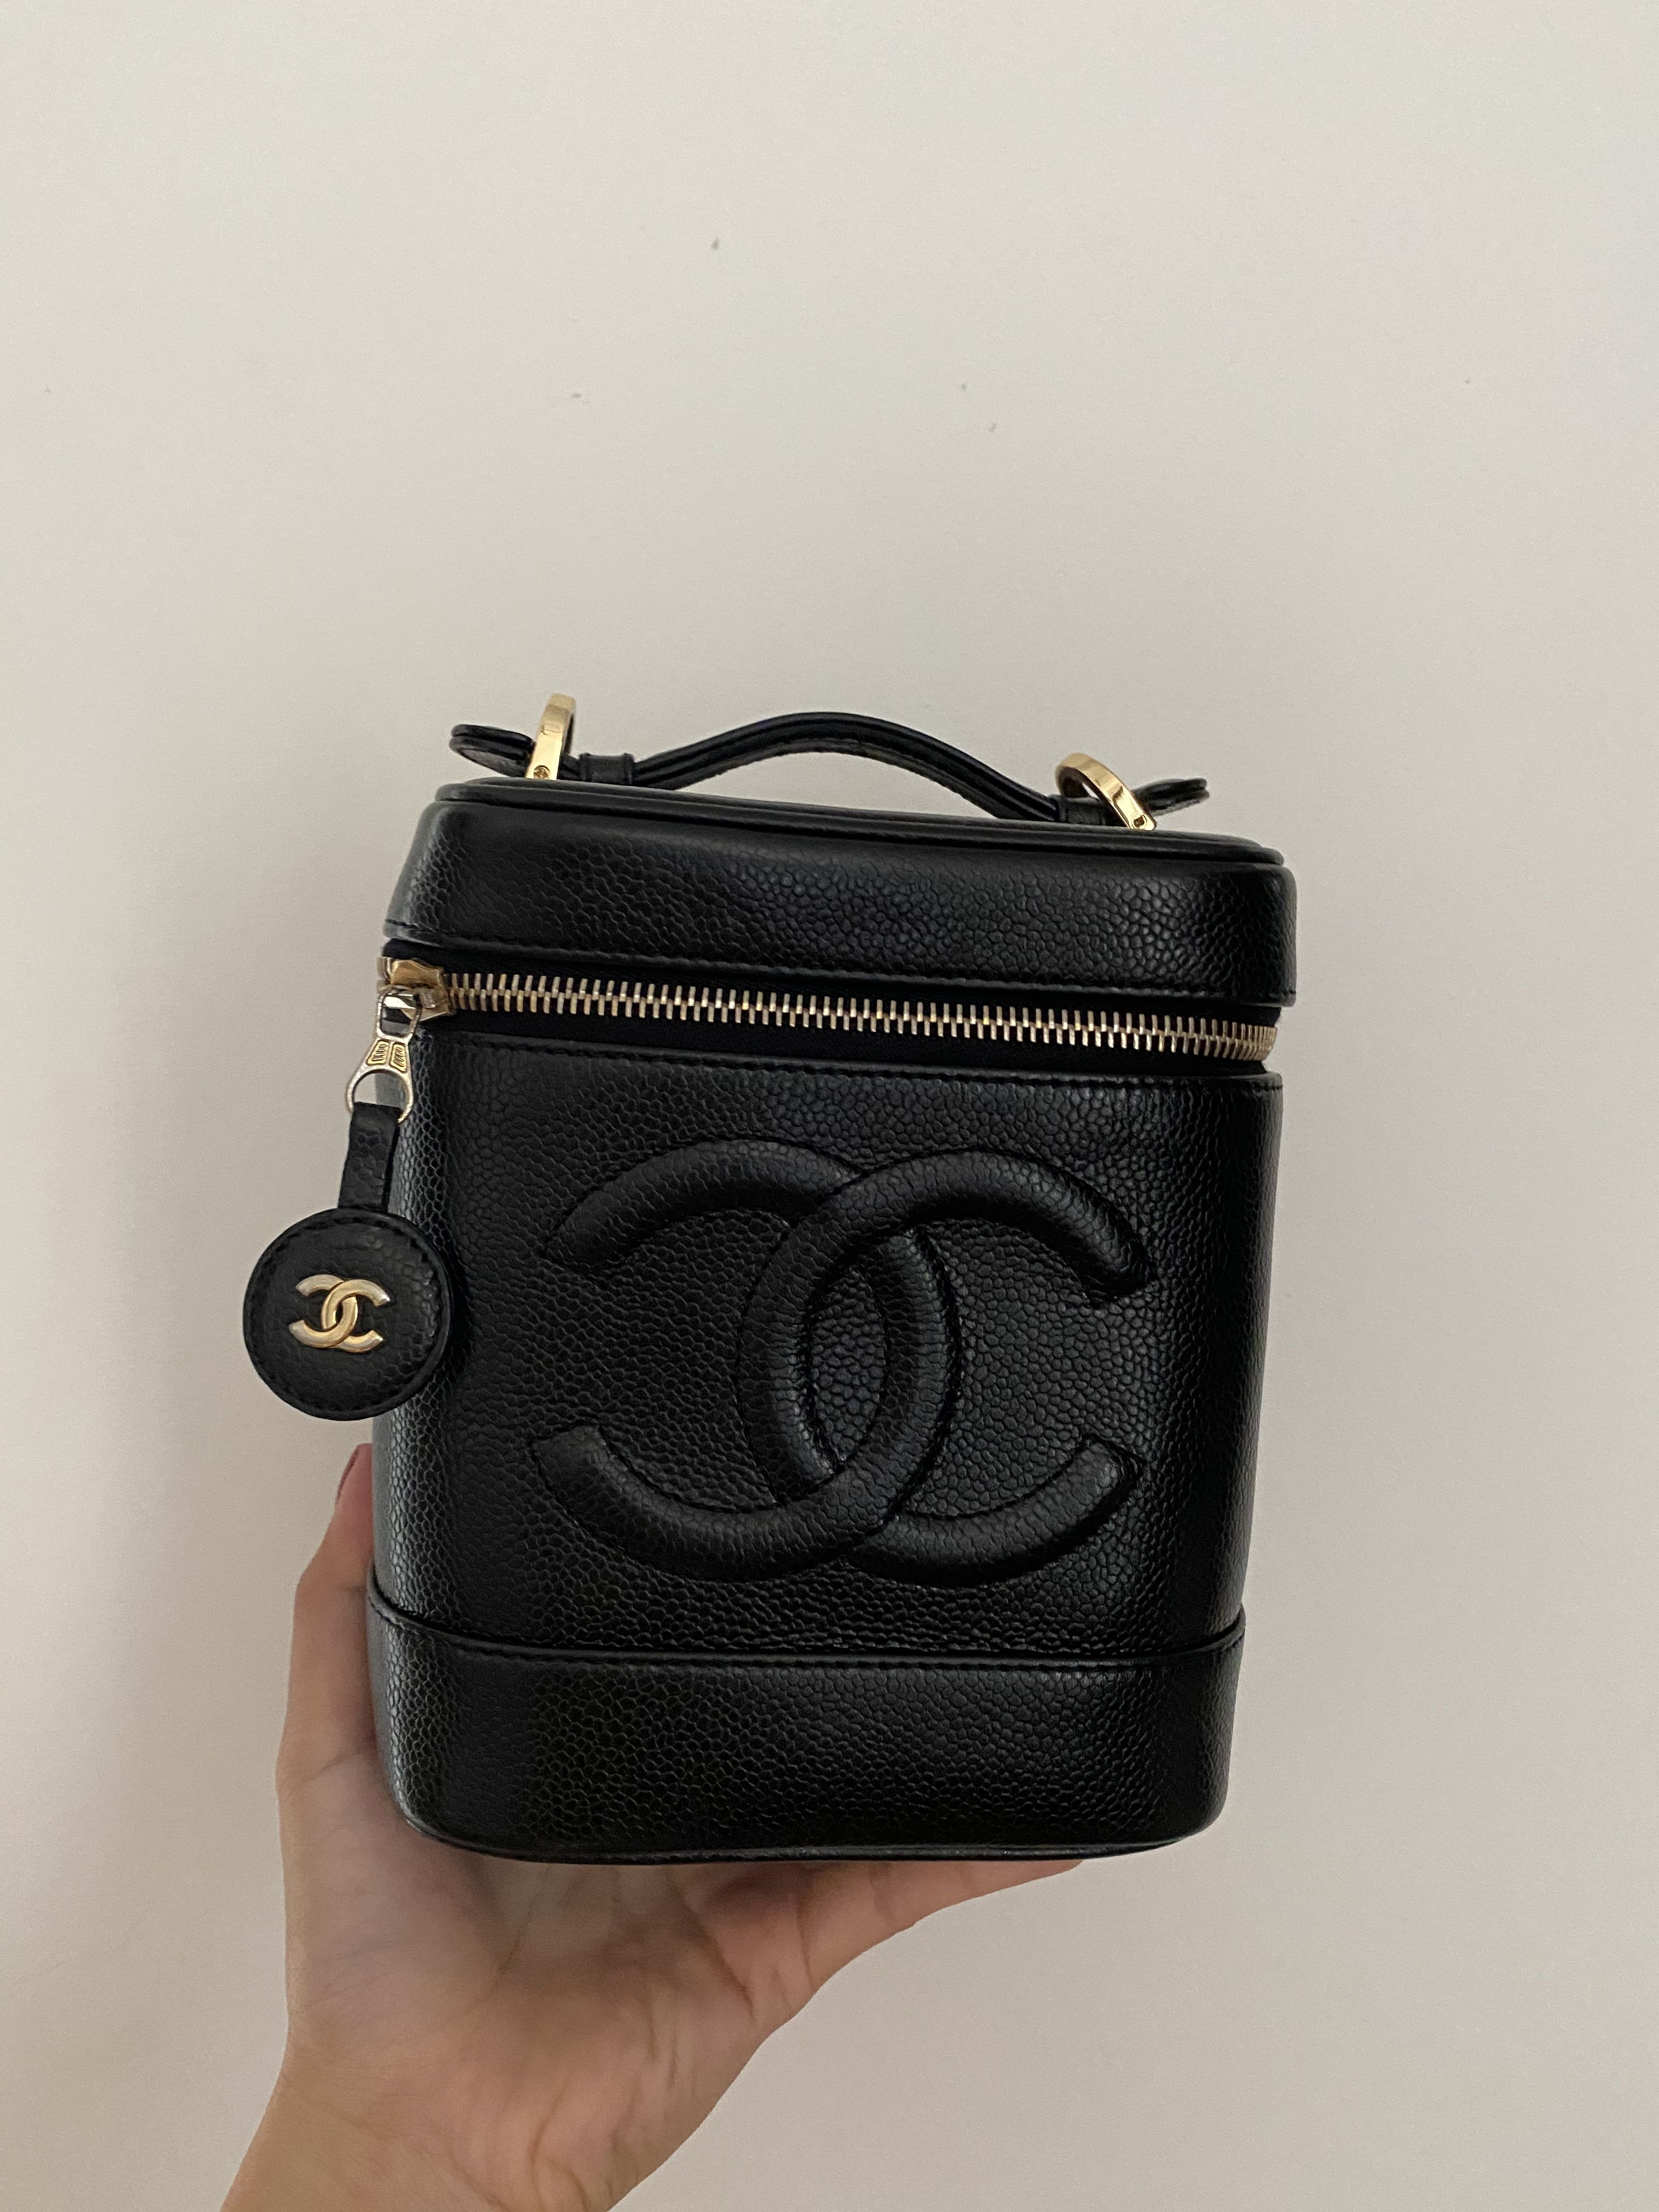 Free shipping!You Searched ForCHANEL Vanity Bag